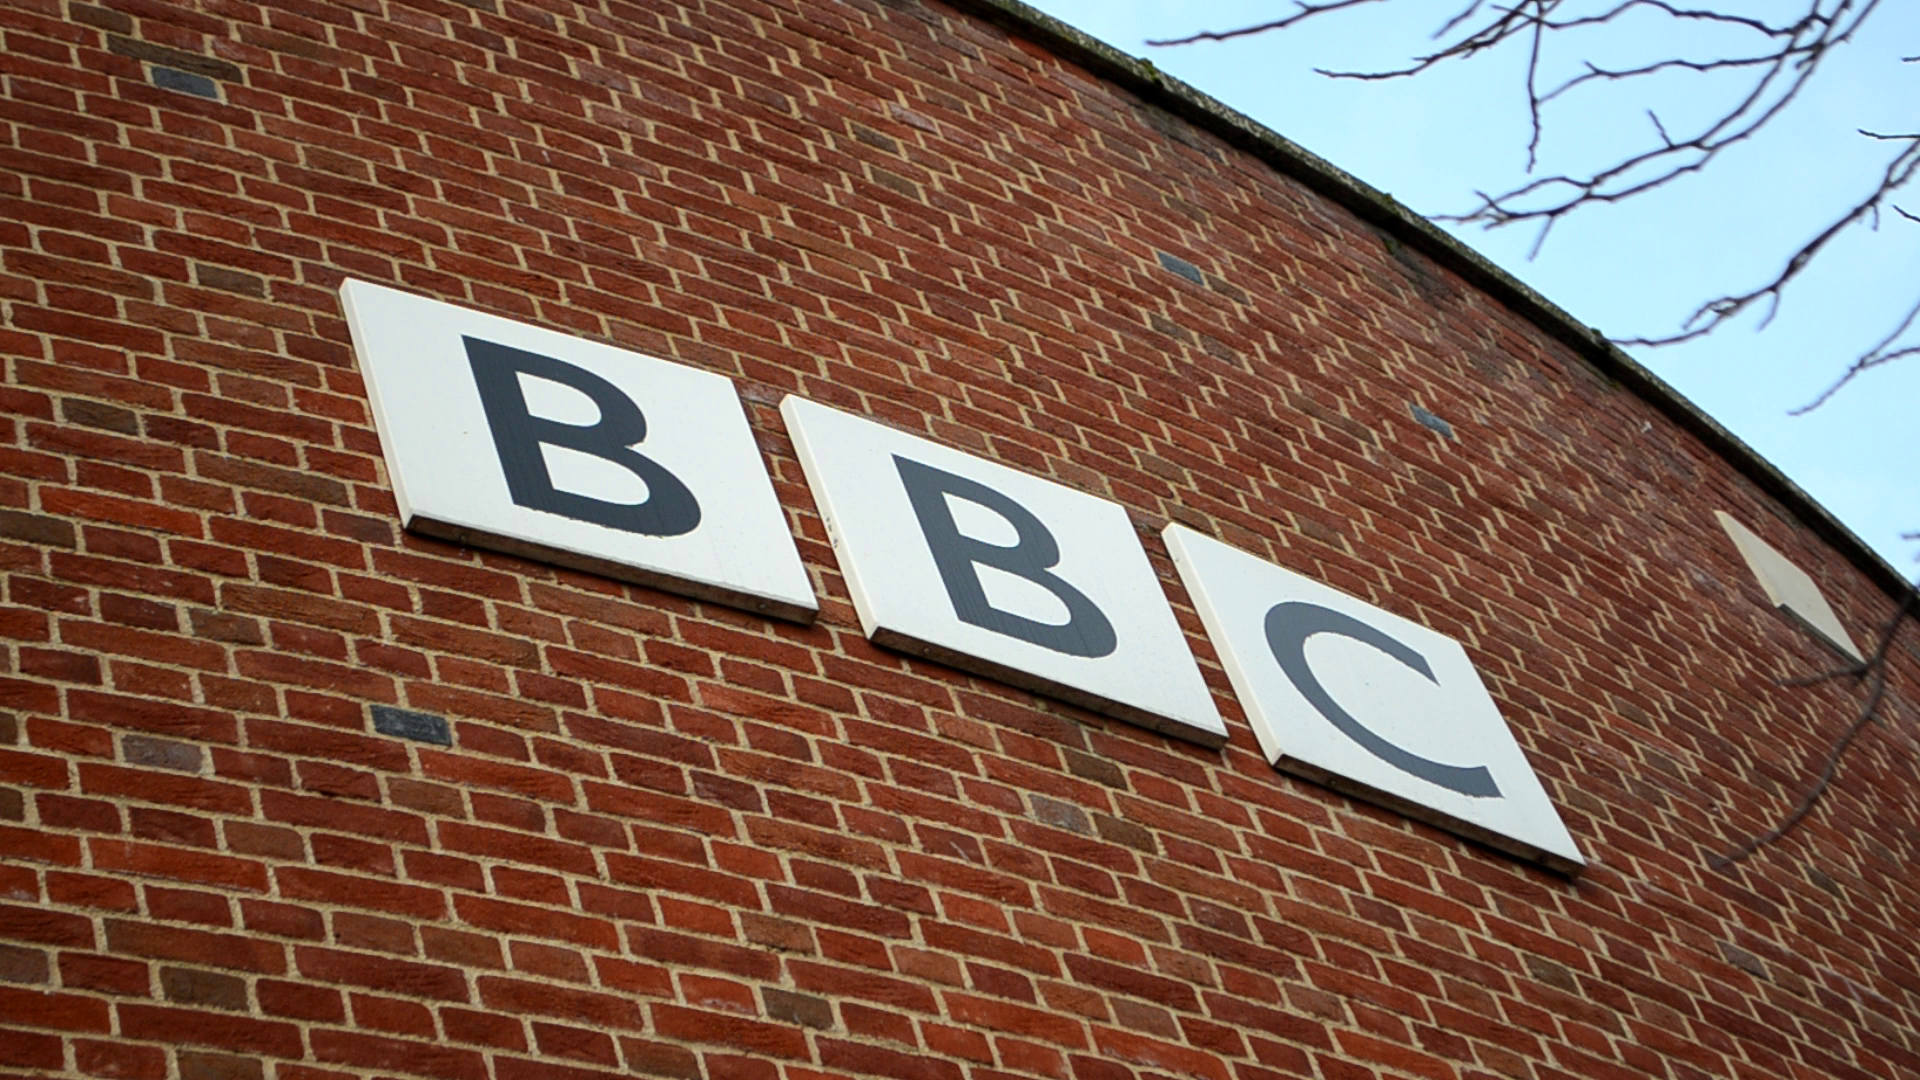 BBC attempt to launder reputation of Graham Linehan of Graham Linehan; the image shows the BBC log on a curved red-brick wall.